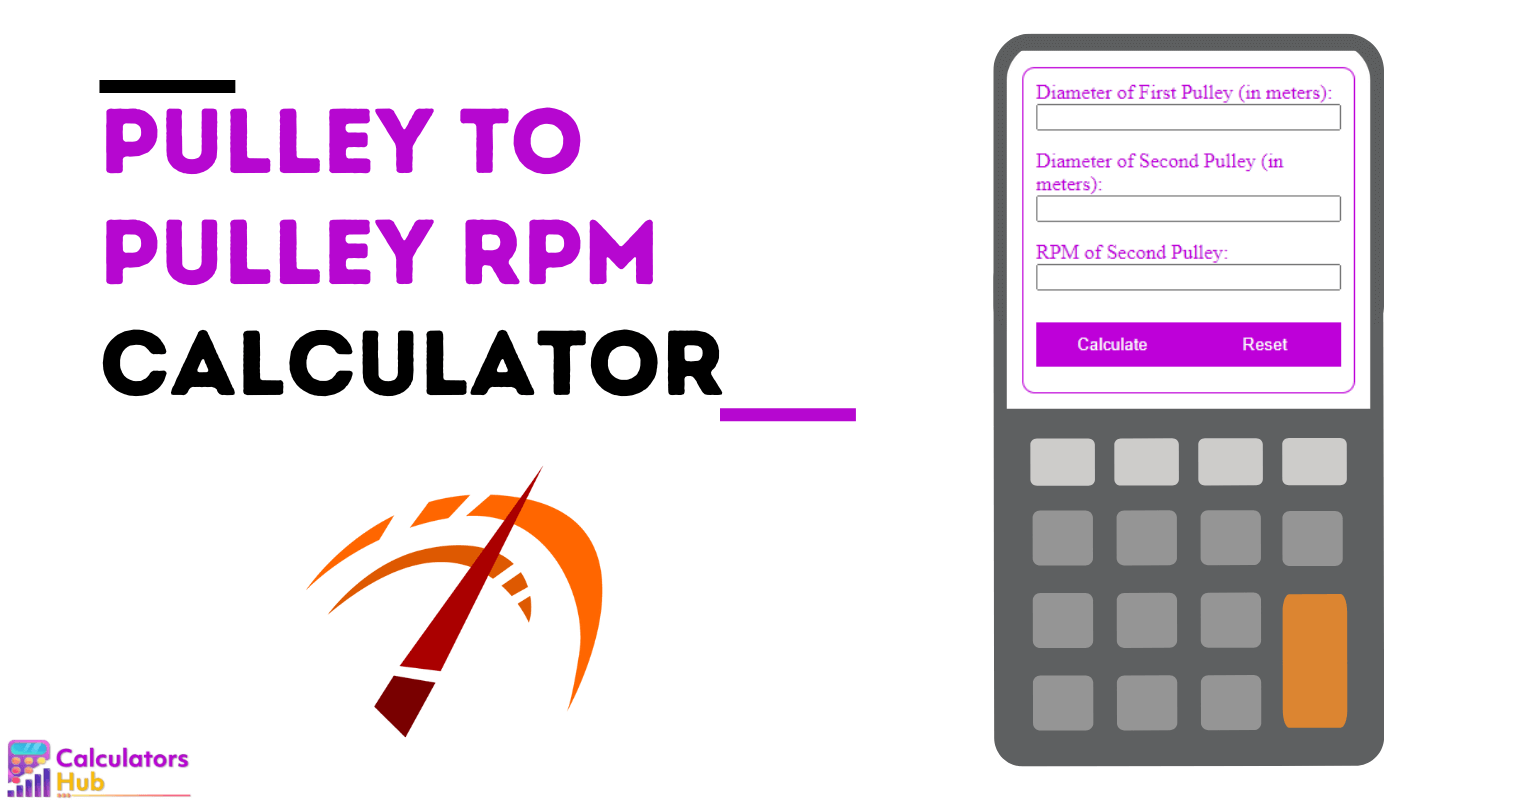 Pulley to Pulley RPM Calculator